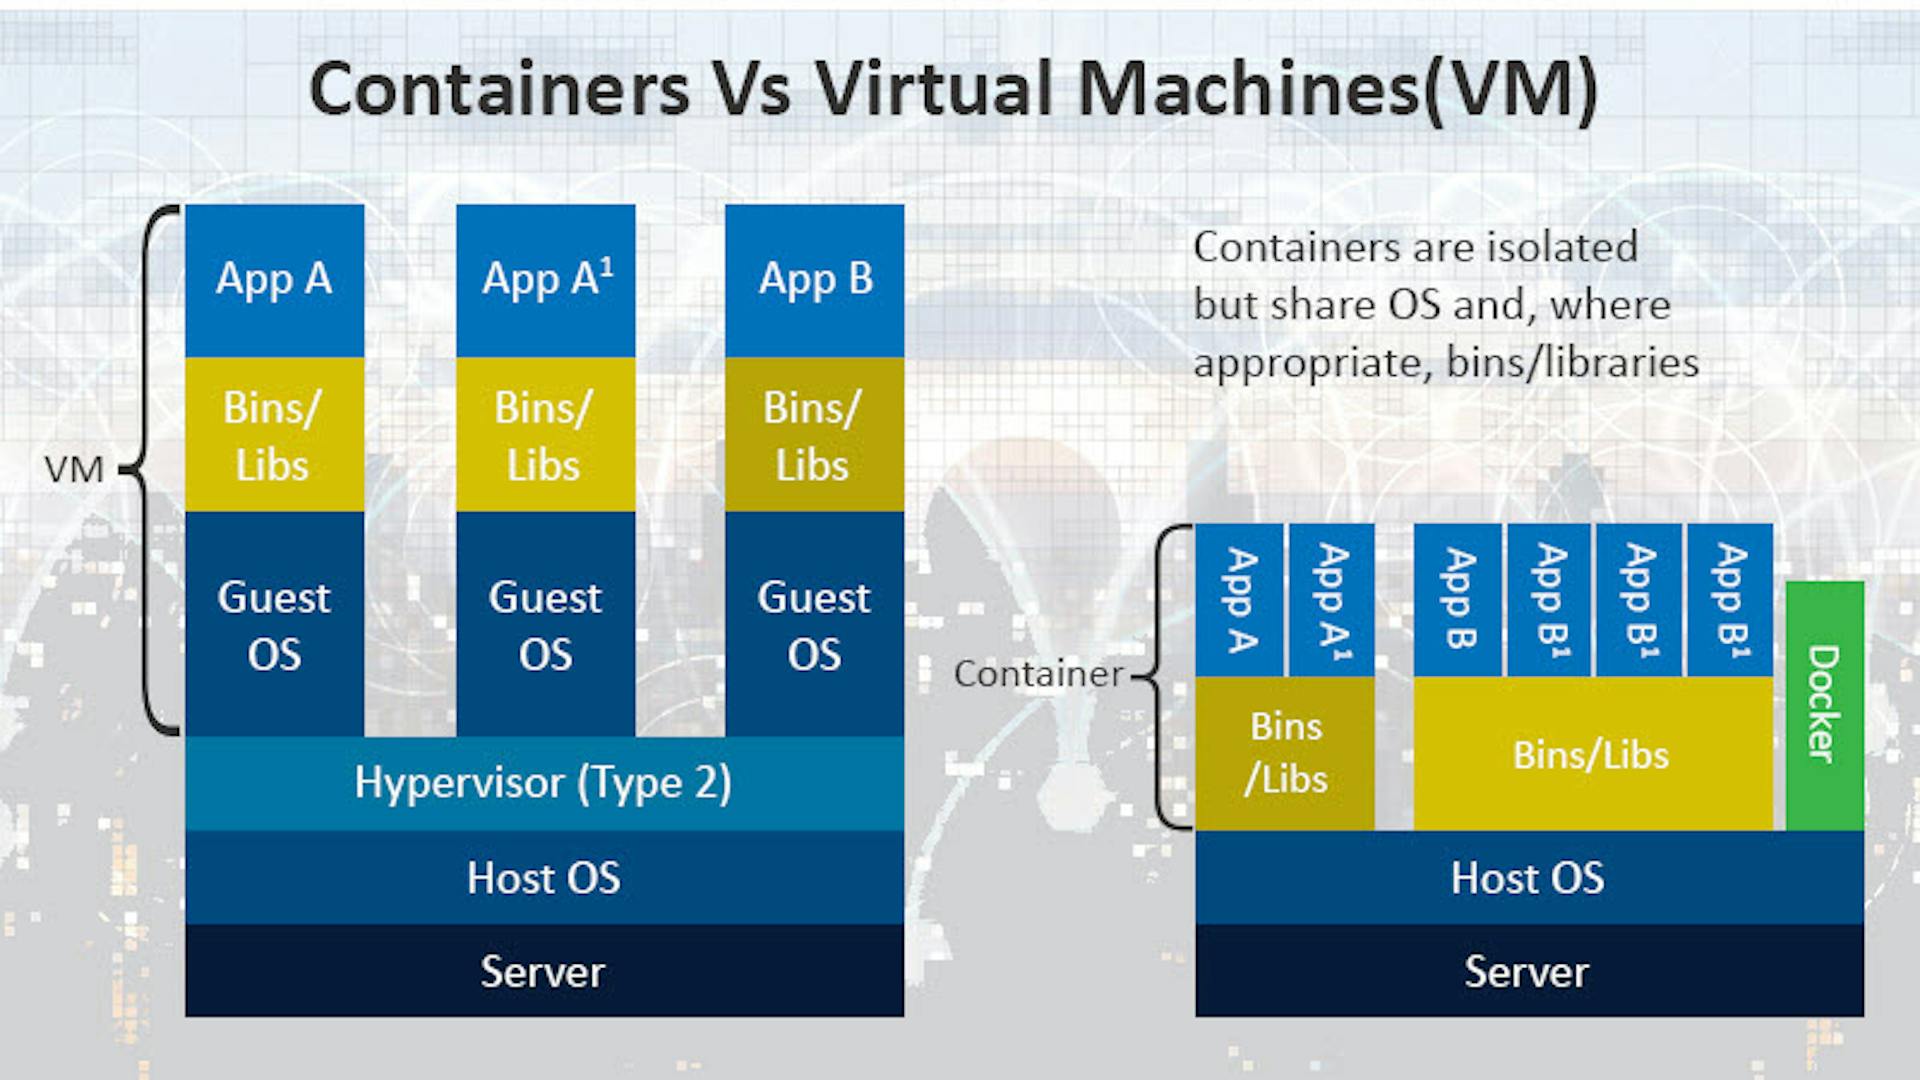 Containers vs VMs Image by Veritis